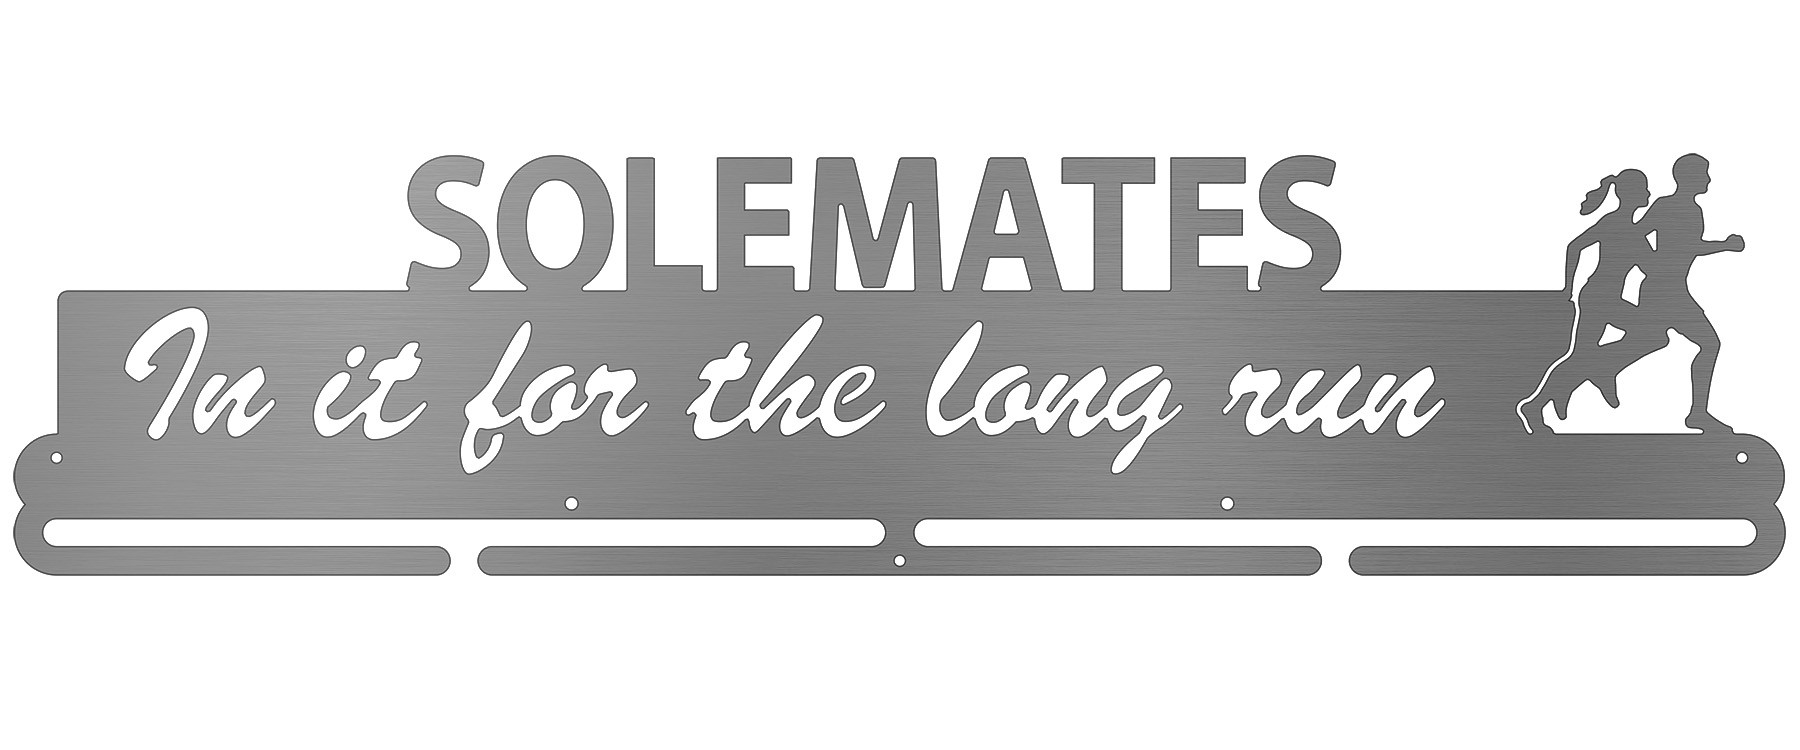 Solemates - In It For The Long Run Bib and Medal Display